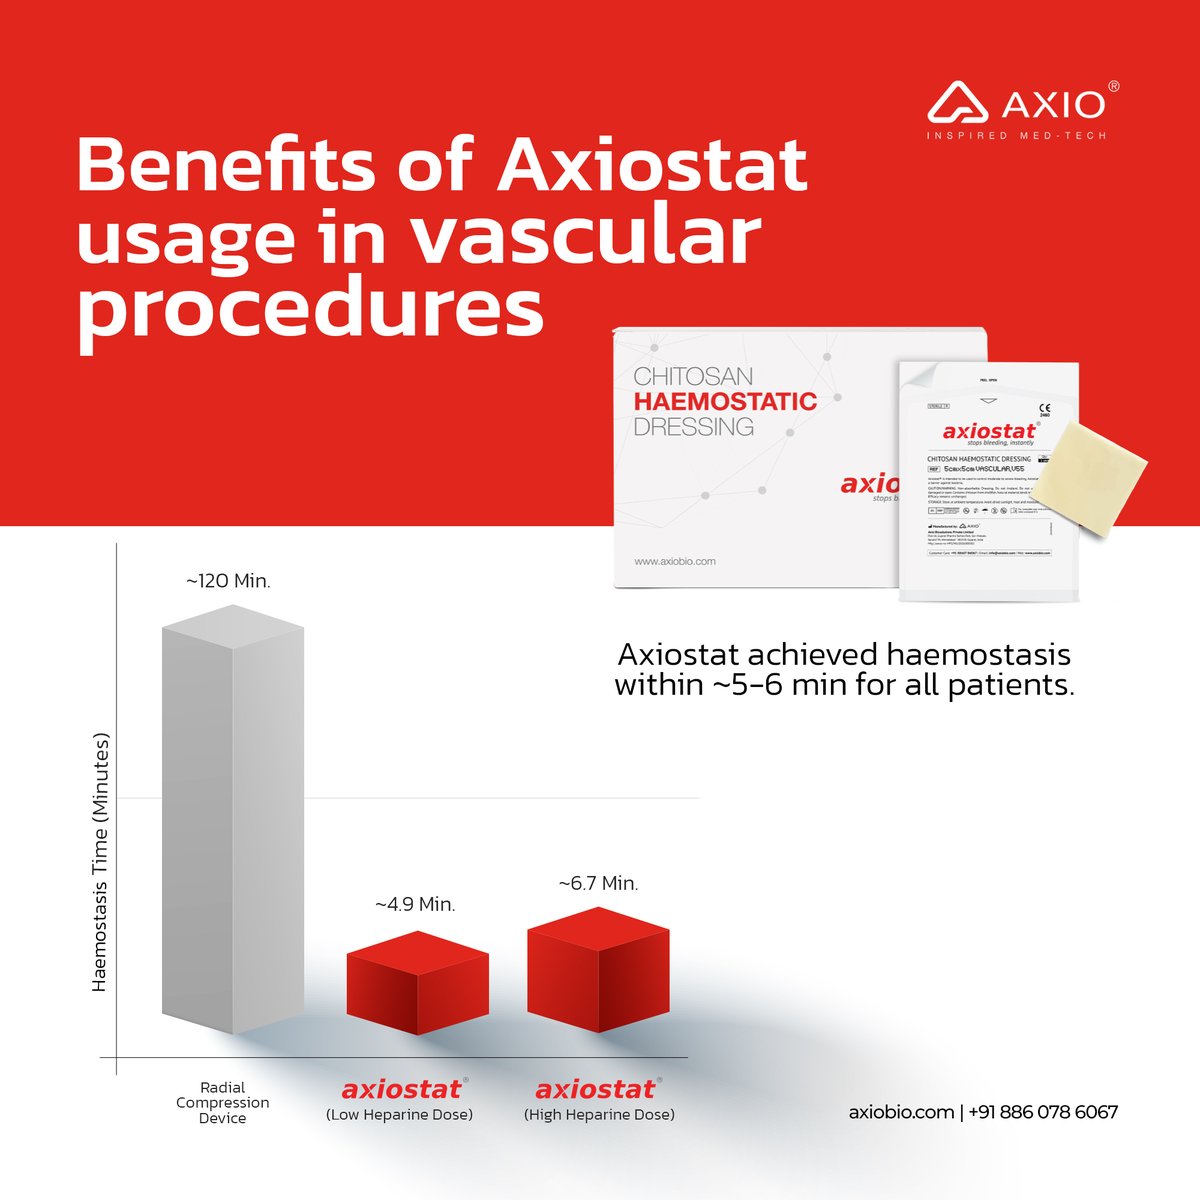 Benefits of Axiostat usage in access closures:

Our PNAS article bit.ly/48UyI4x unveils Axiostat's ability to achieve haemostasis in 5-6 min, even in patients with complicating factors like diabetes, hypertension, or patients on heparin.

#Axiostat #medicalinnovation